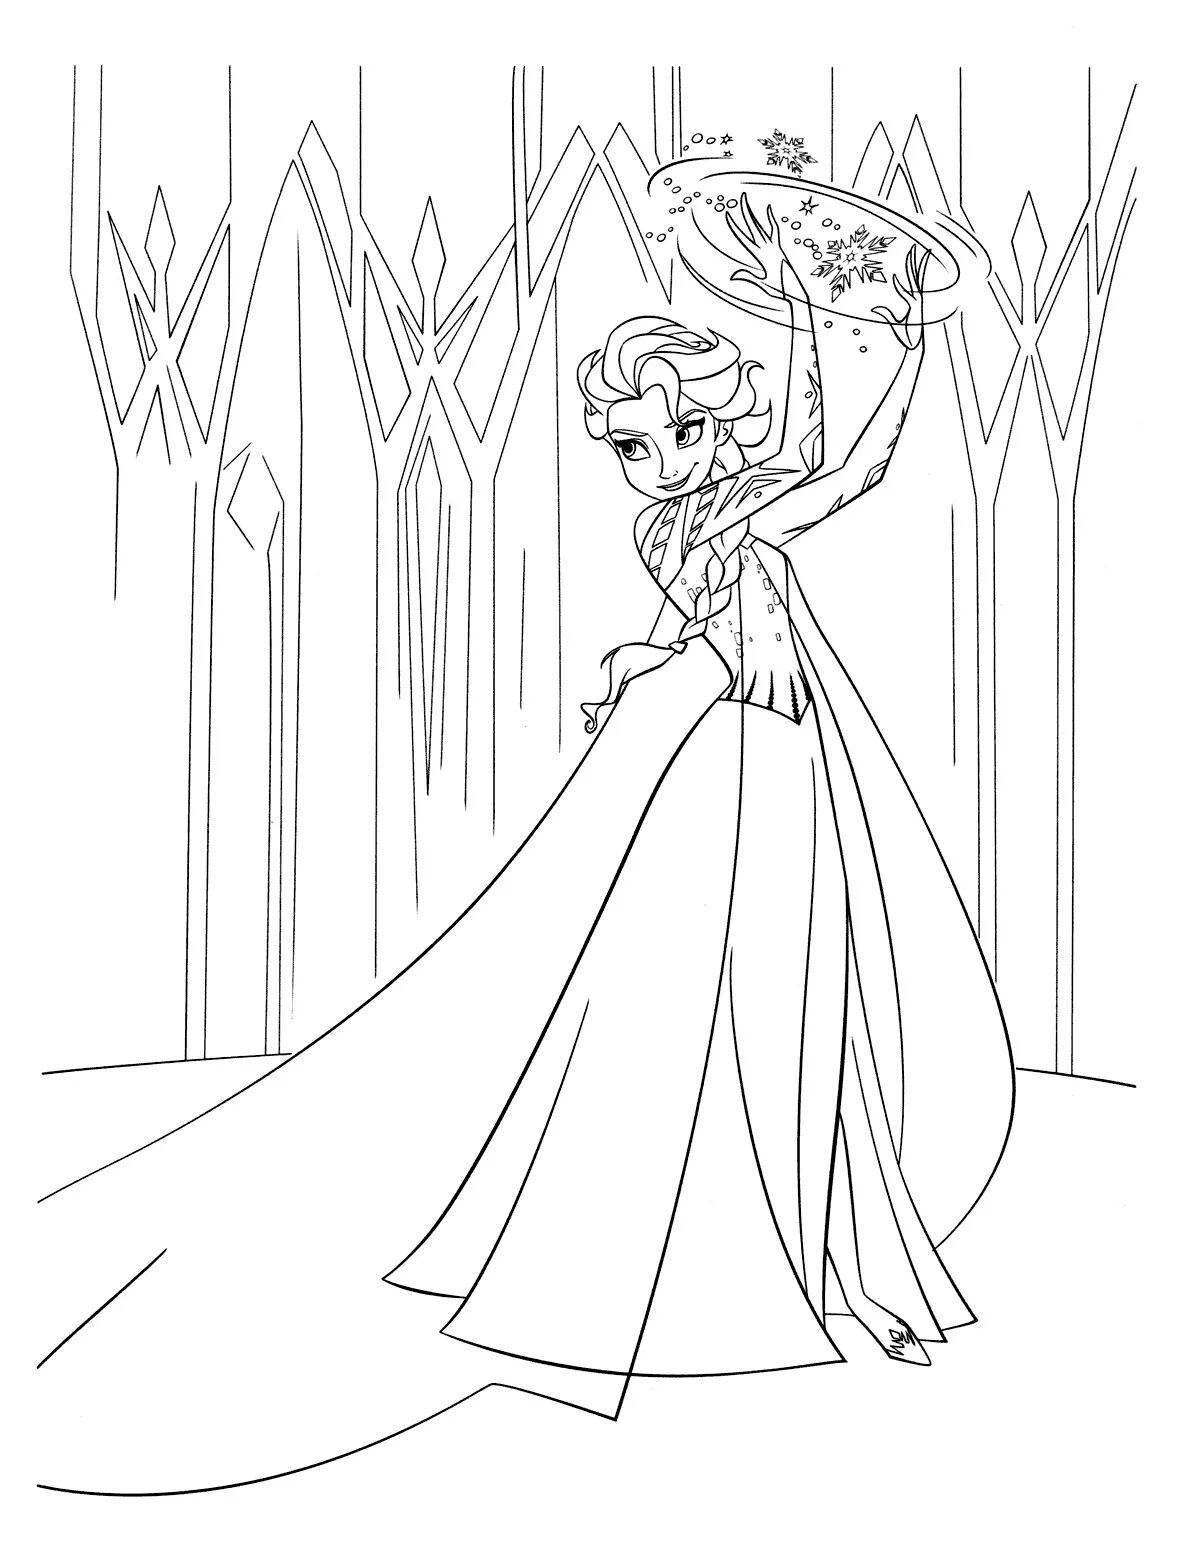 Coloring page charming queen elsa